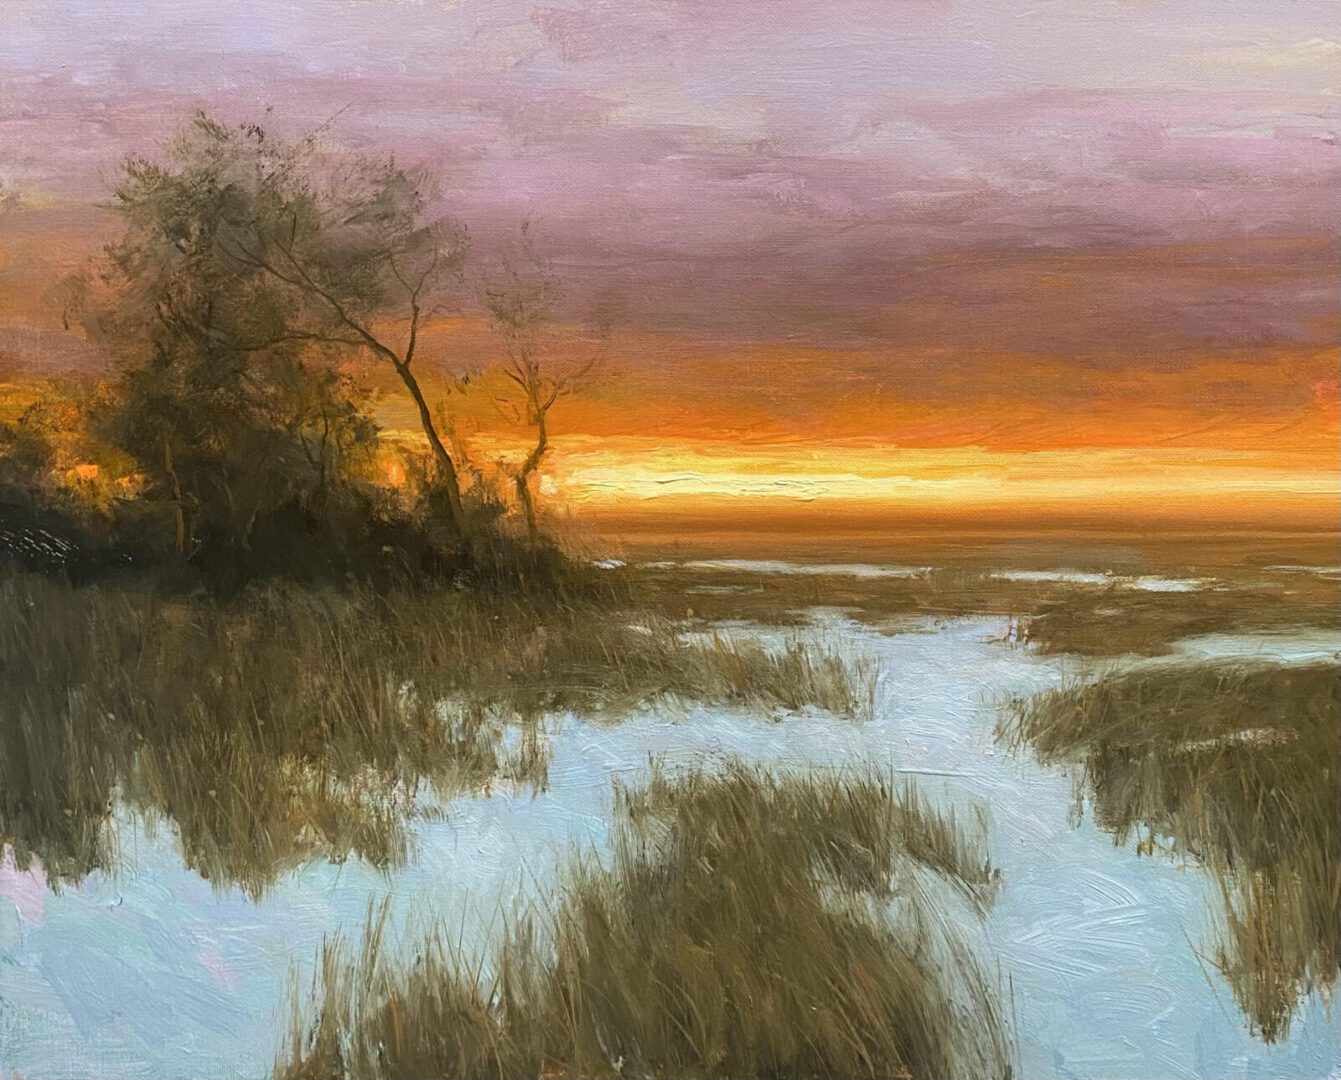 A painting of a marsh at sunset.